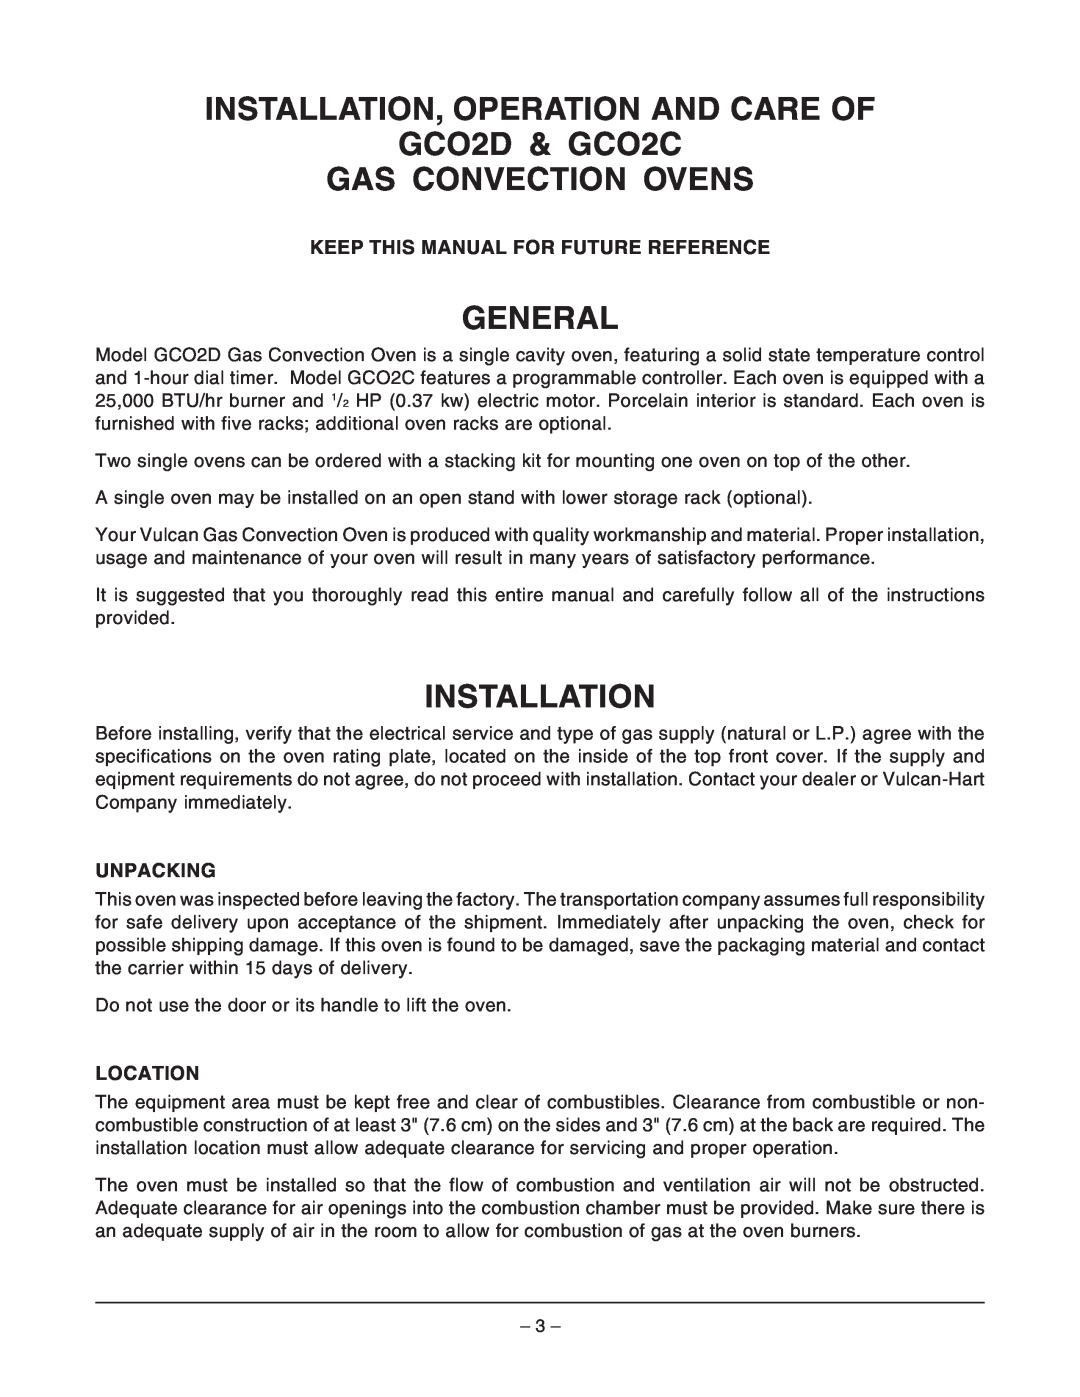 Vulcan-Hart GCO2D ML-114569 INSTALLATION, OPERATION AND CARE OF GCO2D & GCO2C, Gas Convection Ovens, General, Installation 